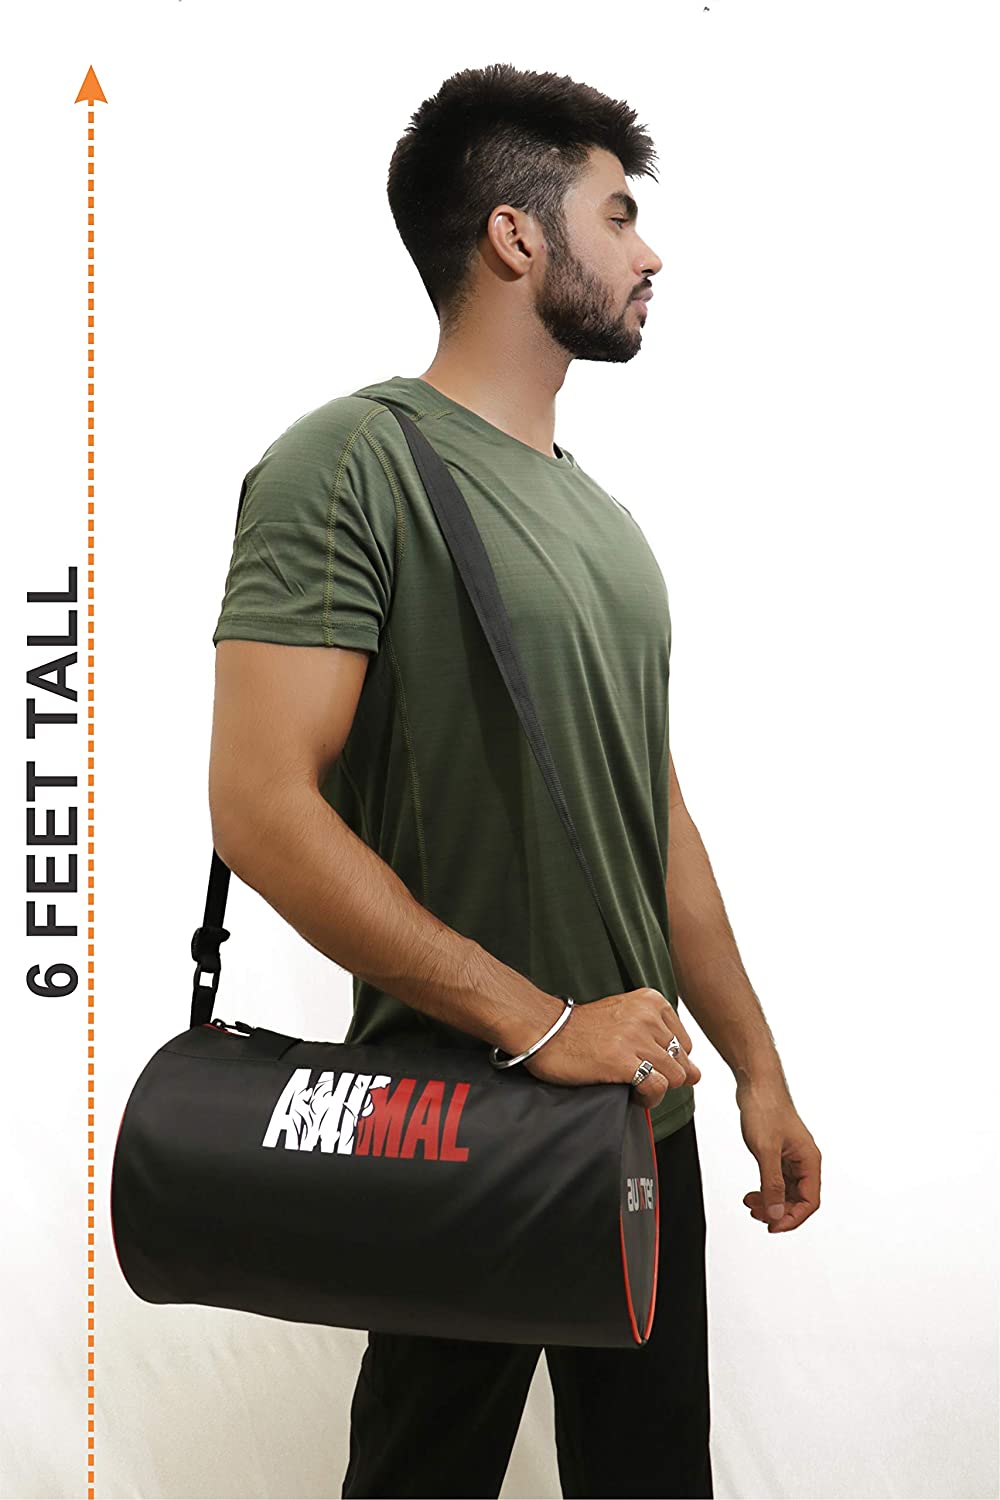 Where Can I Find a Dependable, Dare-I-Say Cute Gym Bag? - Racked